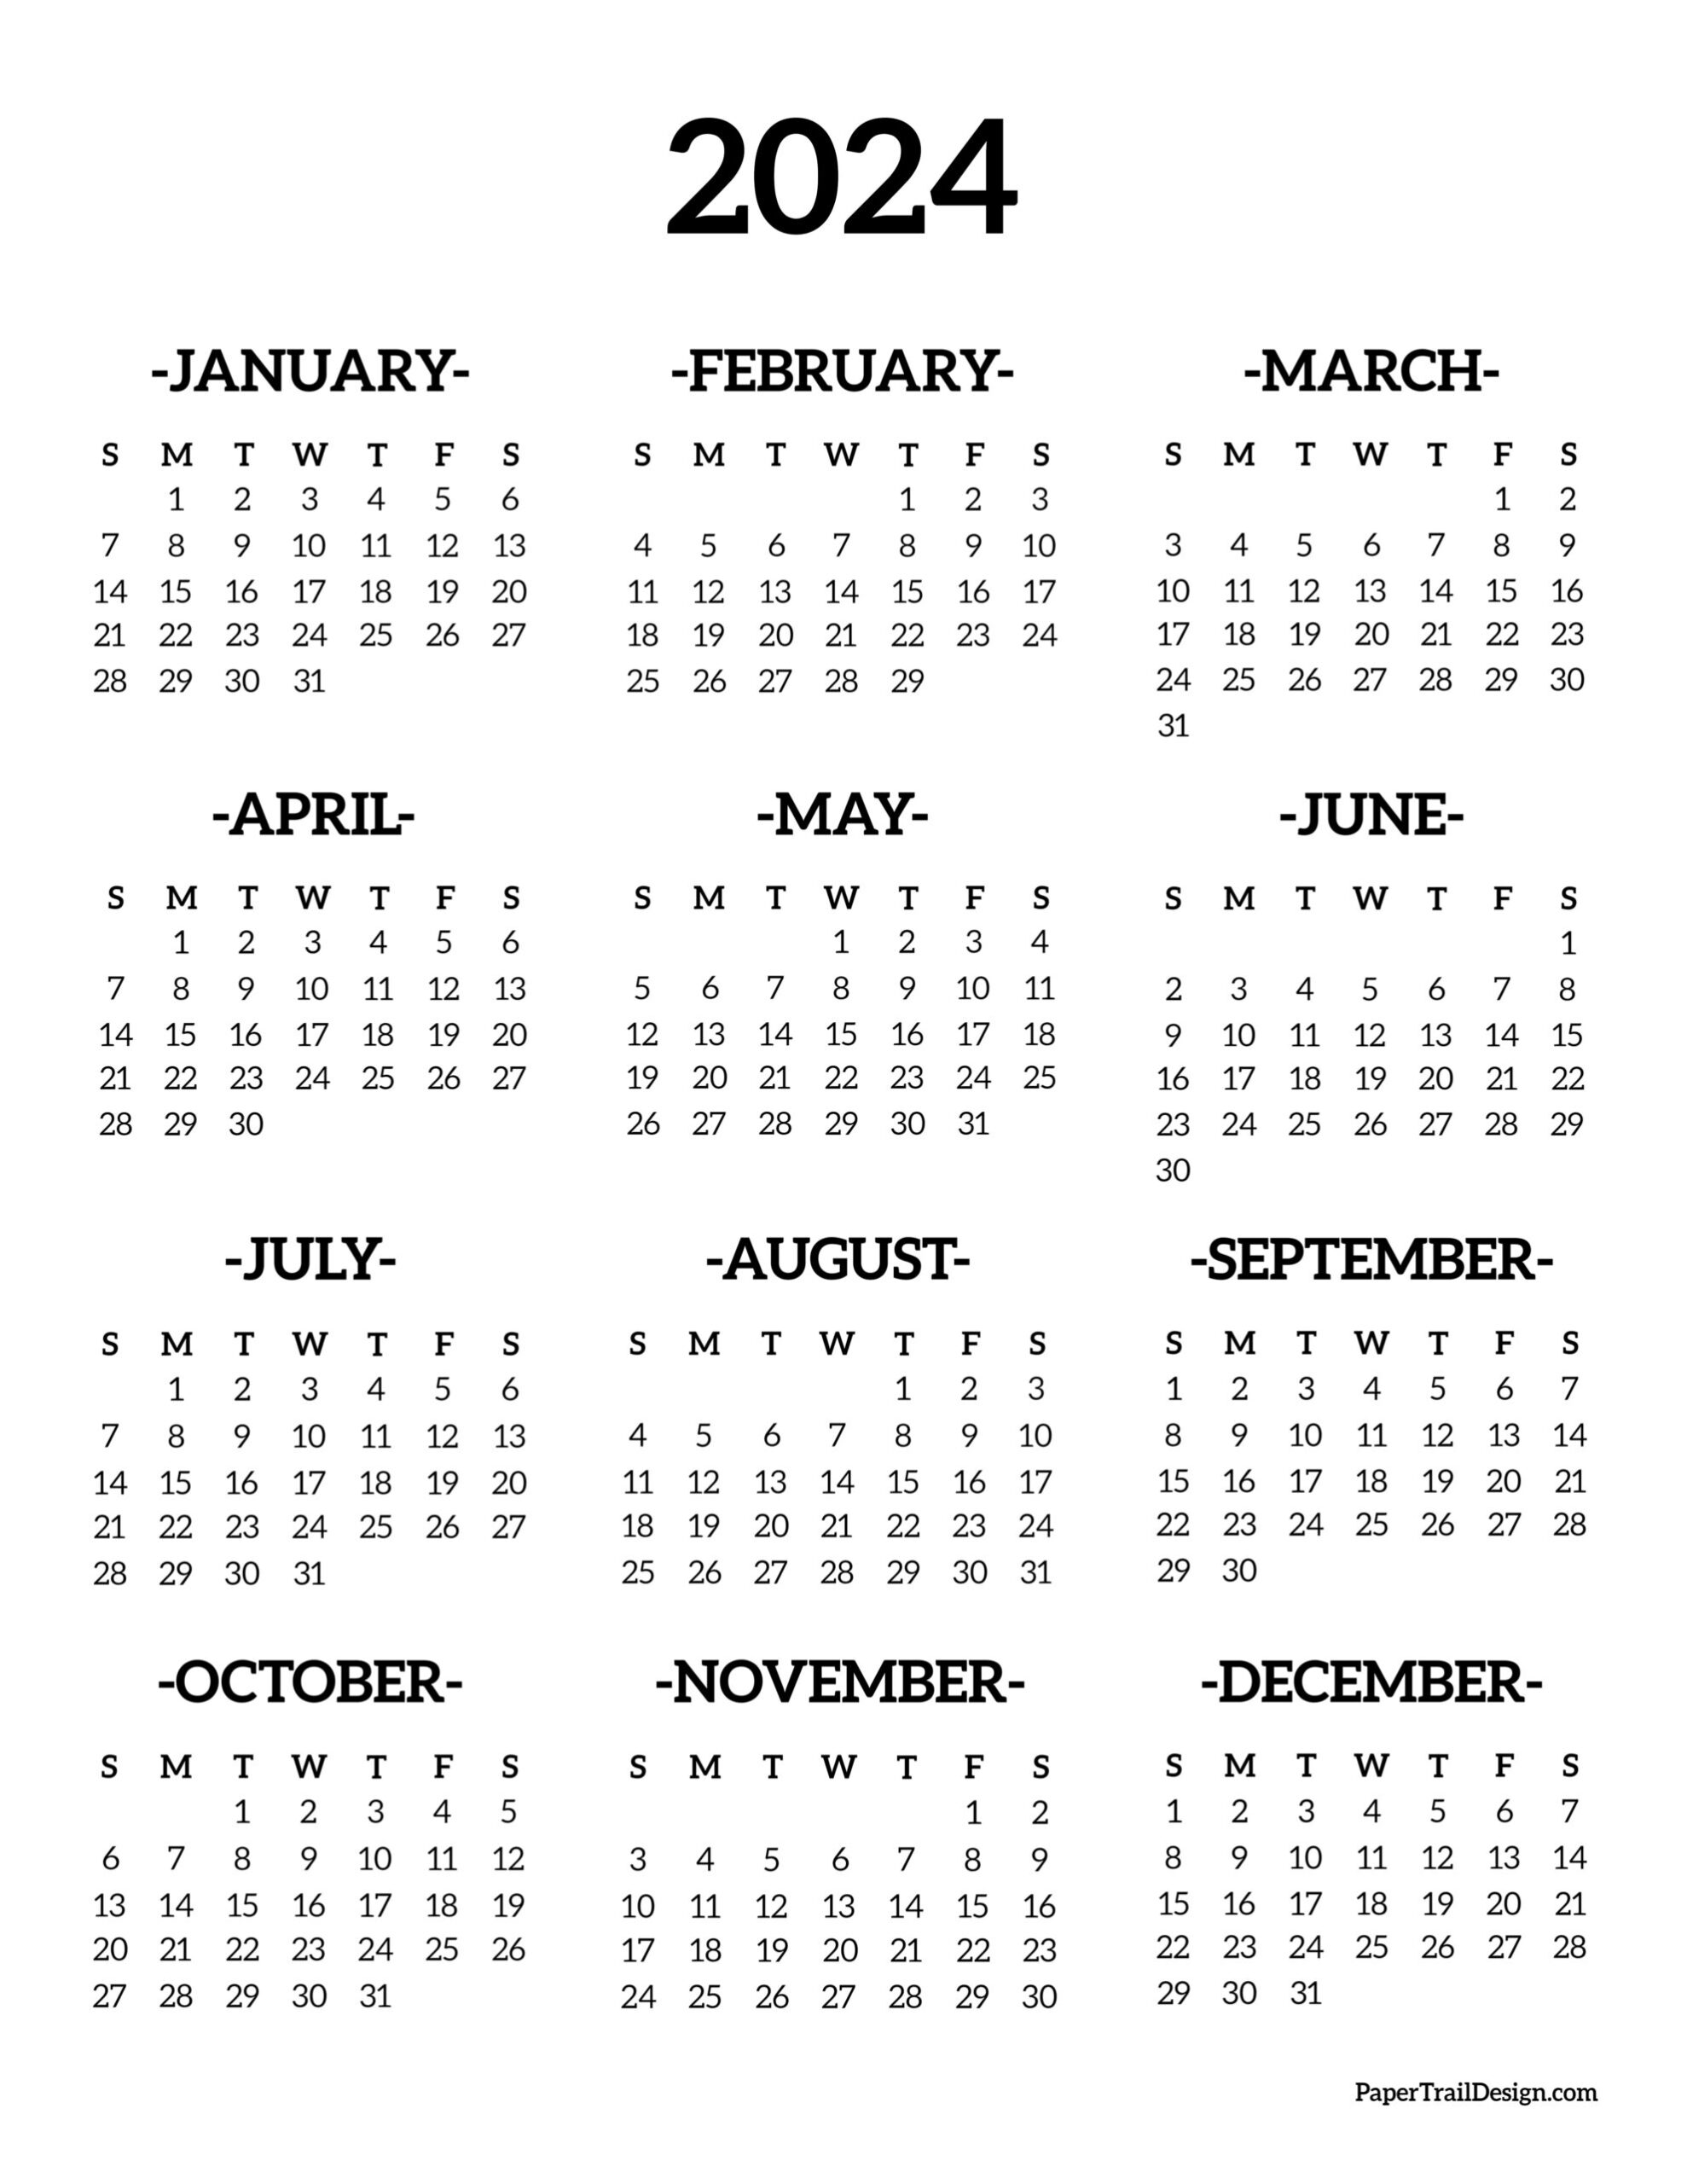 Calendar 2024 Printable One Page - Paper Trail Design for Printable Yearly Calendar 2024